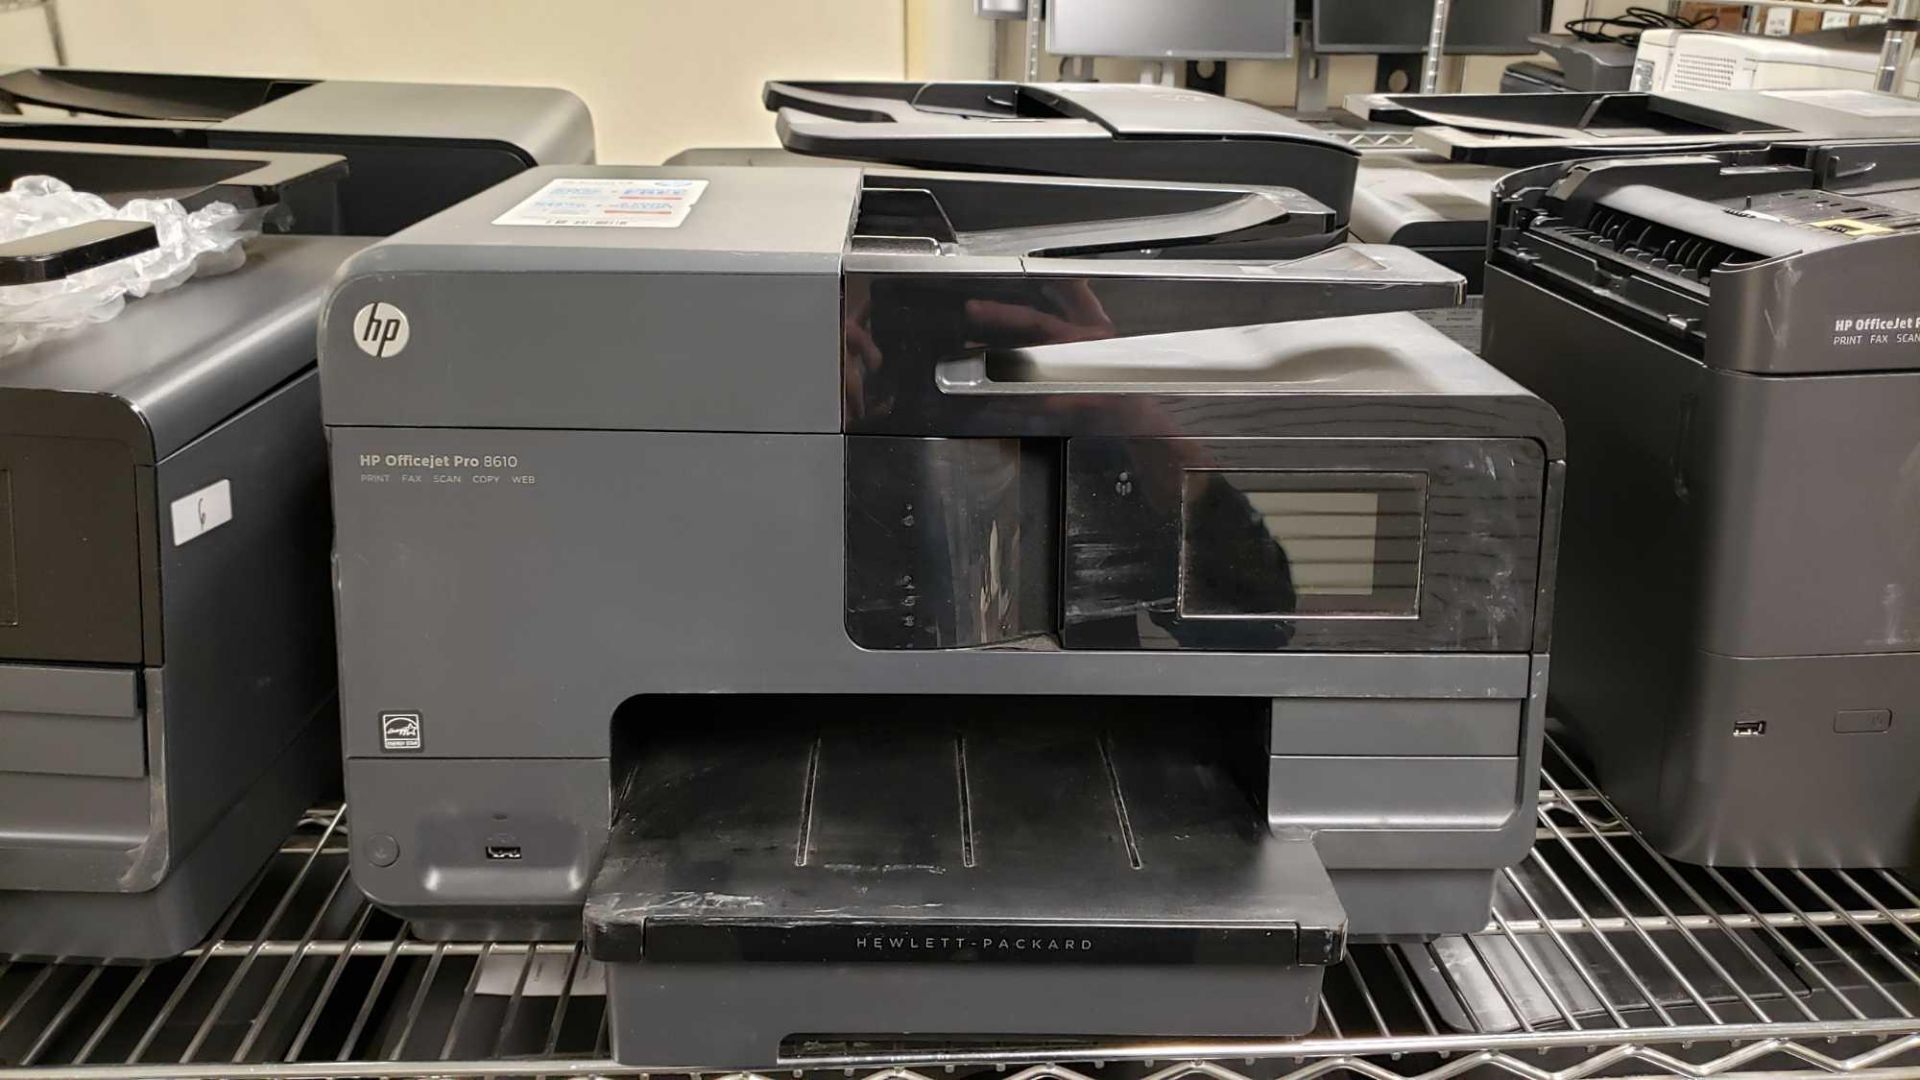 Lot of (3) HP Printers to include (2) HP Officejet Pro 8610 and (1) HP Officejet Pro 8710 - Image 3 of 8